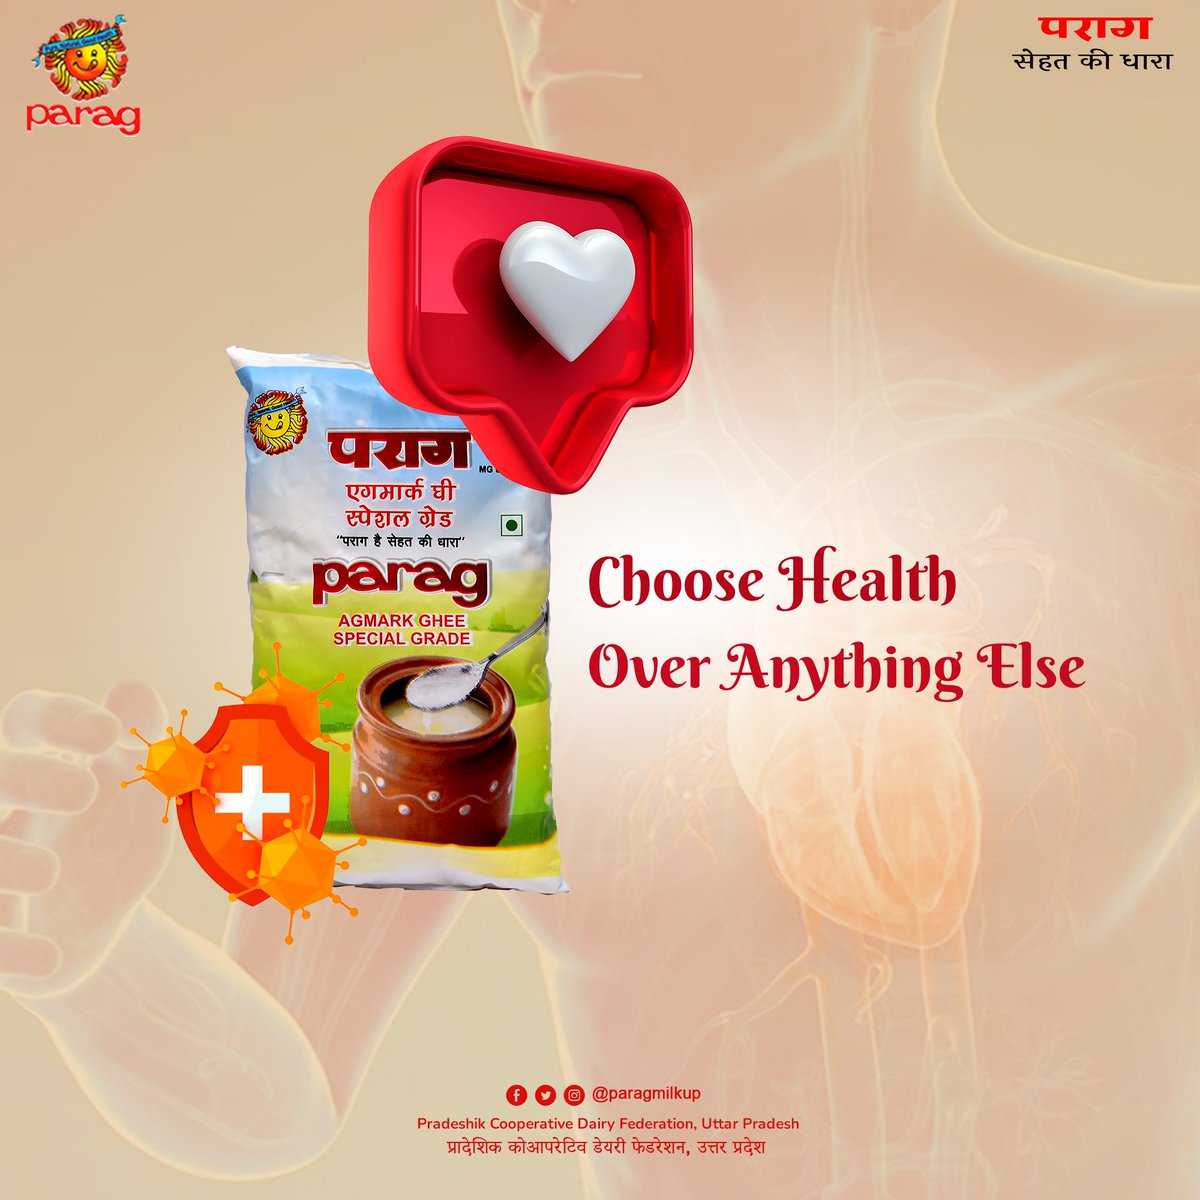 Choose Health,
Over anything else.
 #ghee #foodie #food #yummy #healthy #indianfood #organic #butter #halwa #desighee #dairy #milk #indiansweets #delicious #homemade #sweet #foodlove #india #instafood #CSKvsDC  #foodiegram #PMModiji #MilkLove